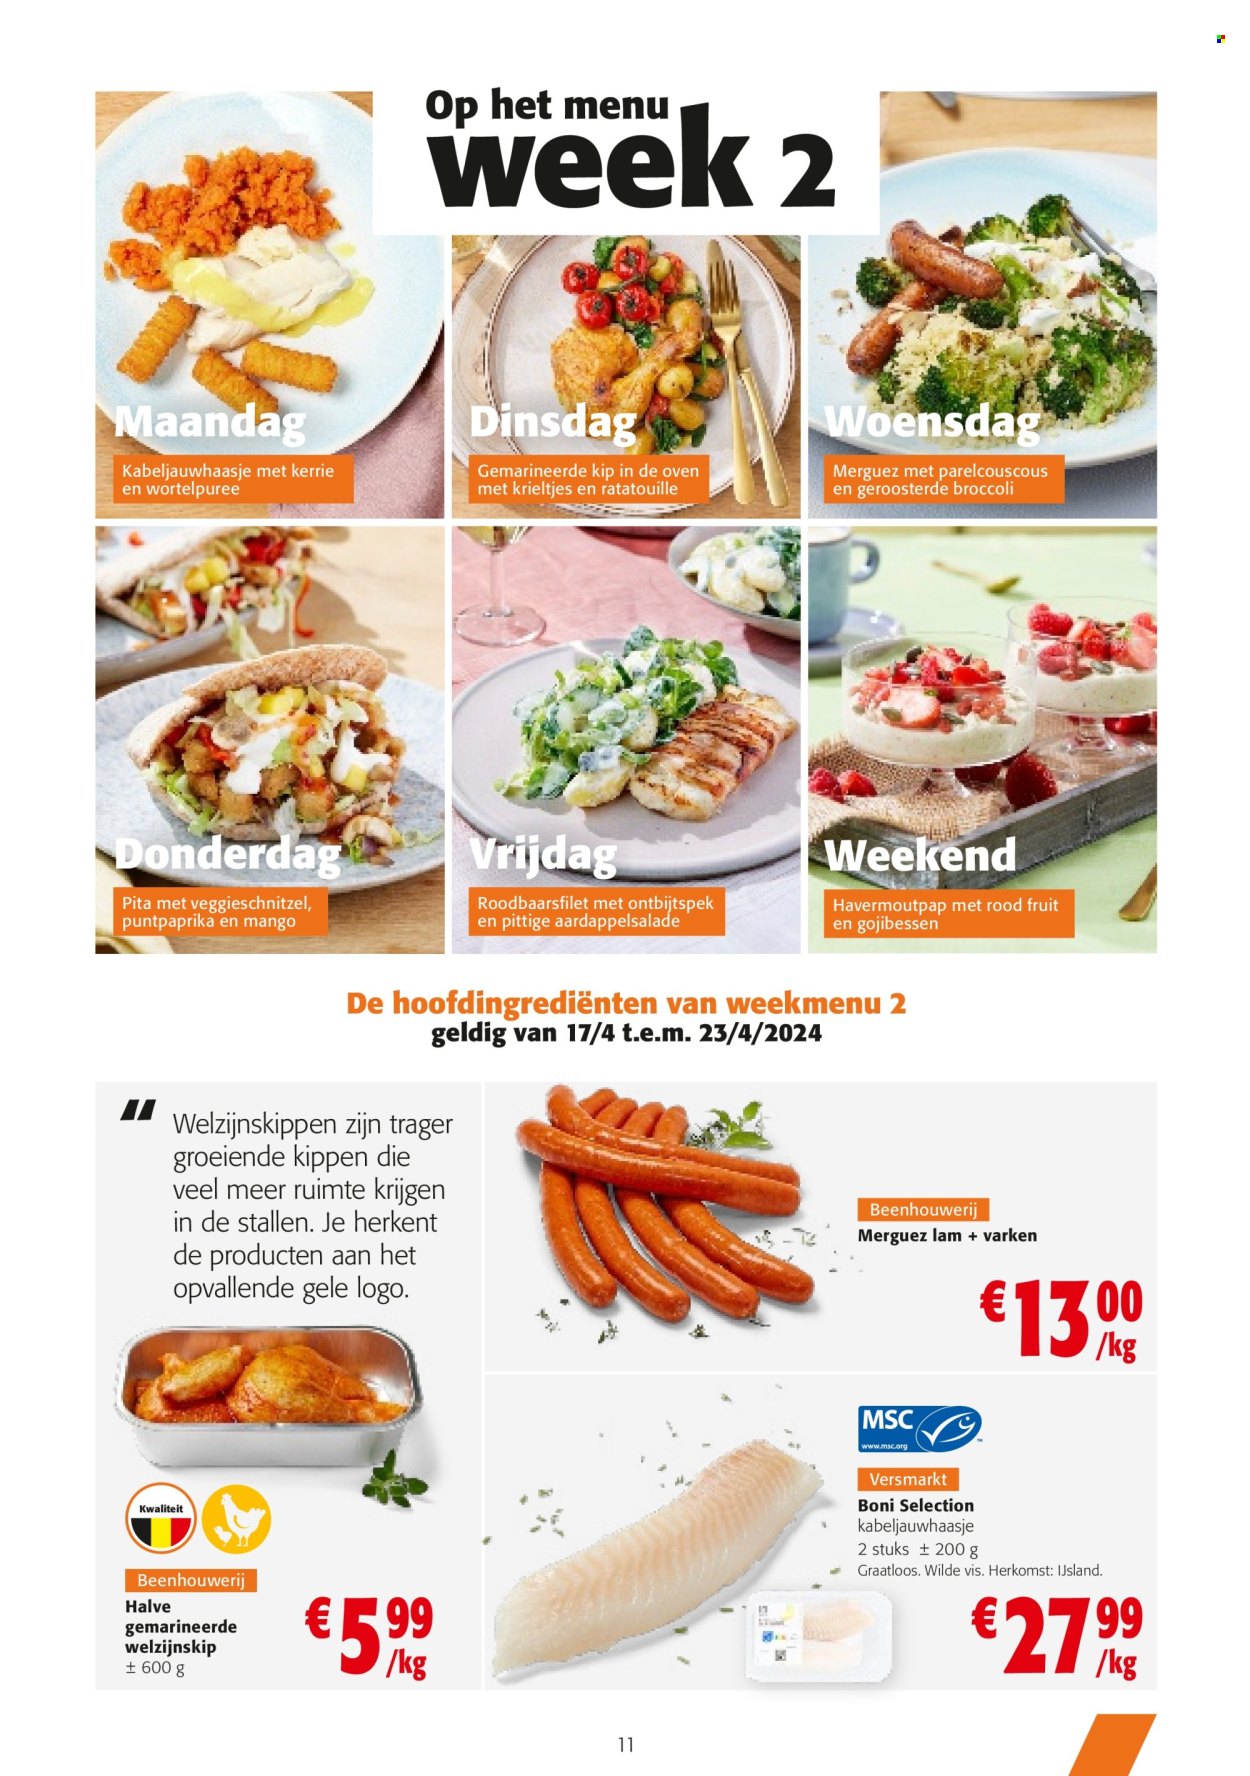 Catalogue Colruyt - 10.4.2024 - 23.4.2024. Page 11.